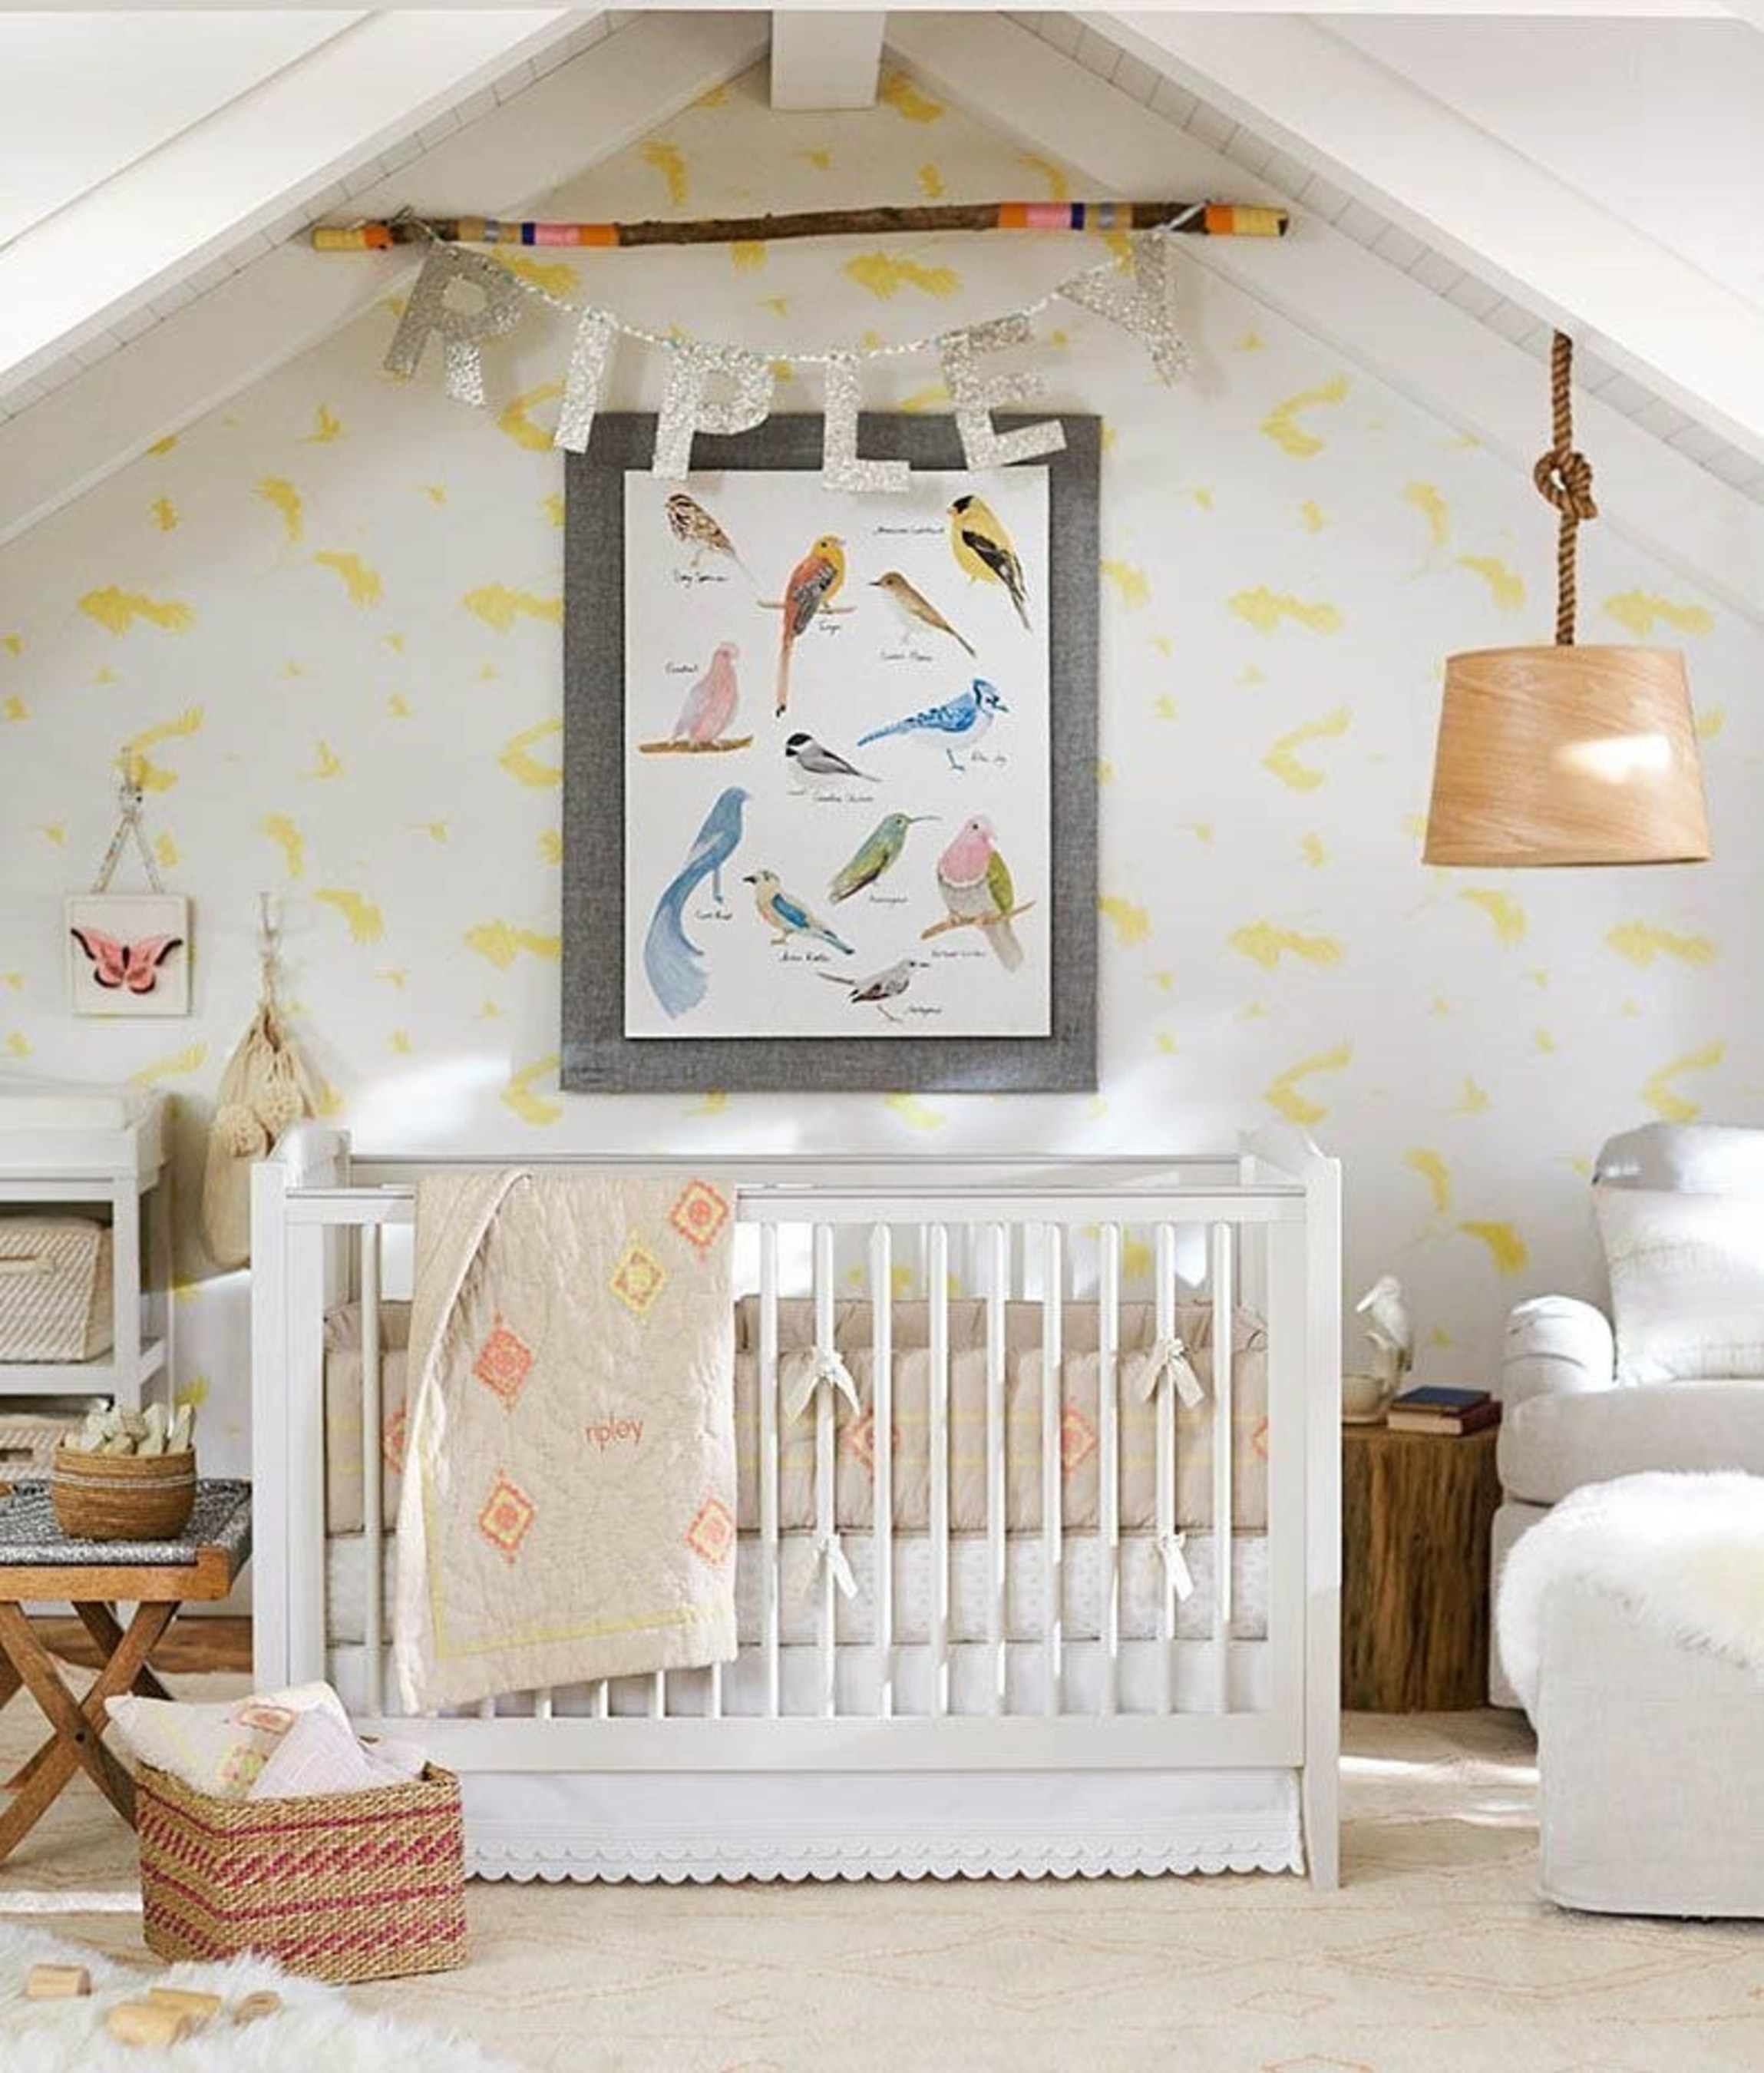 POTTERY BARN KIDS LAUNCHES EXCLUSIVE COLLABORATION WITH HOME